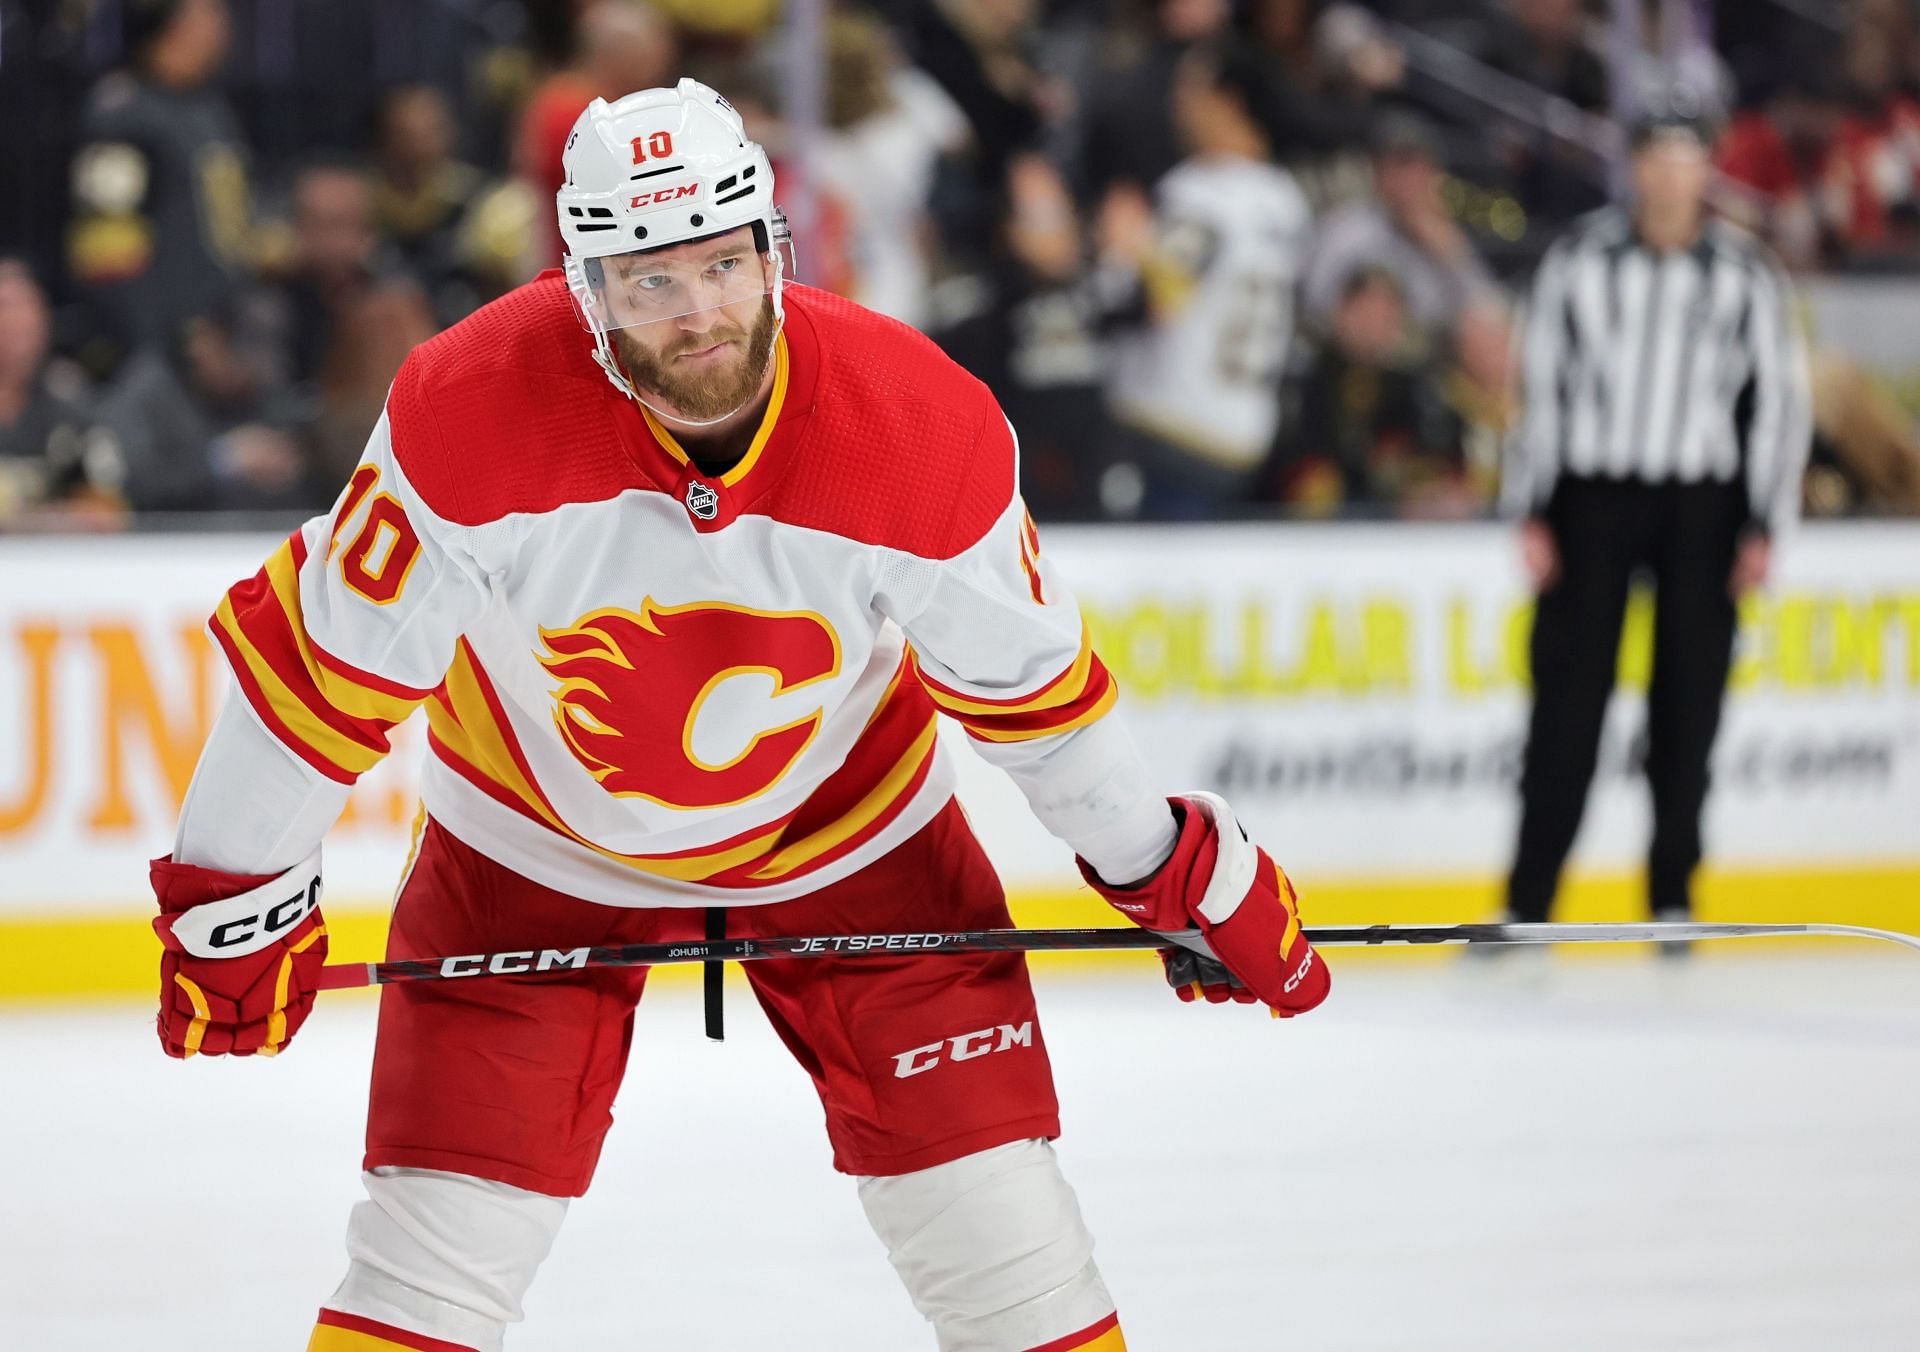 Are More Moves in Store for the Calgary Flames? - The Hockey News